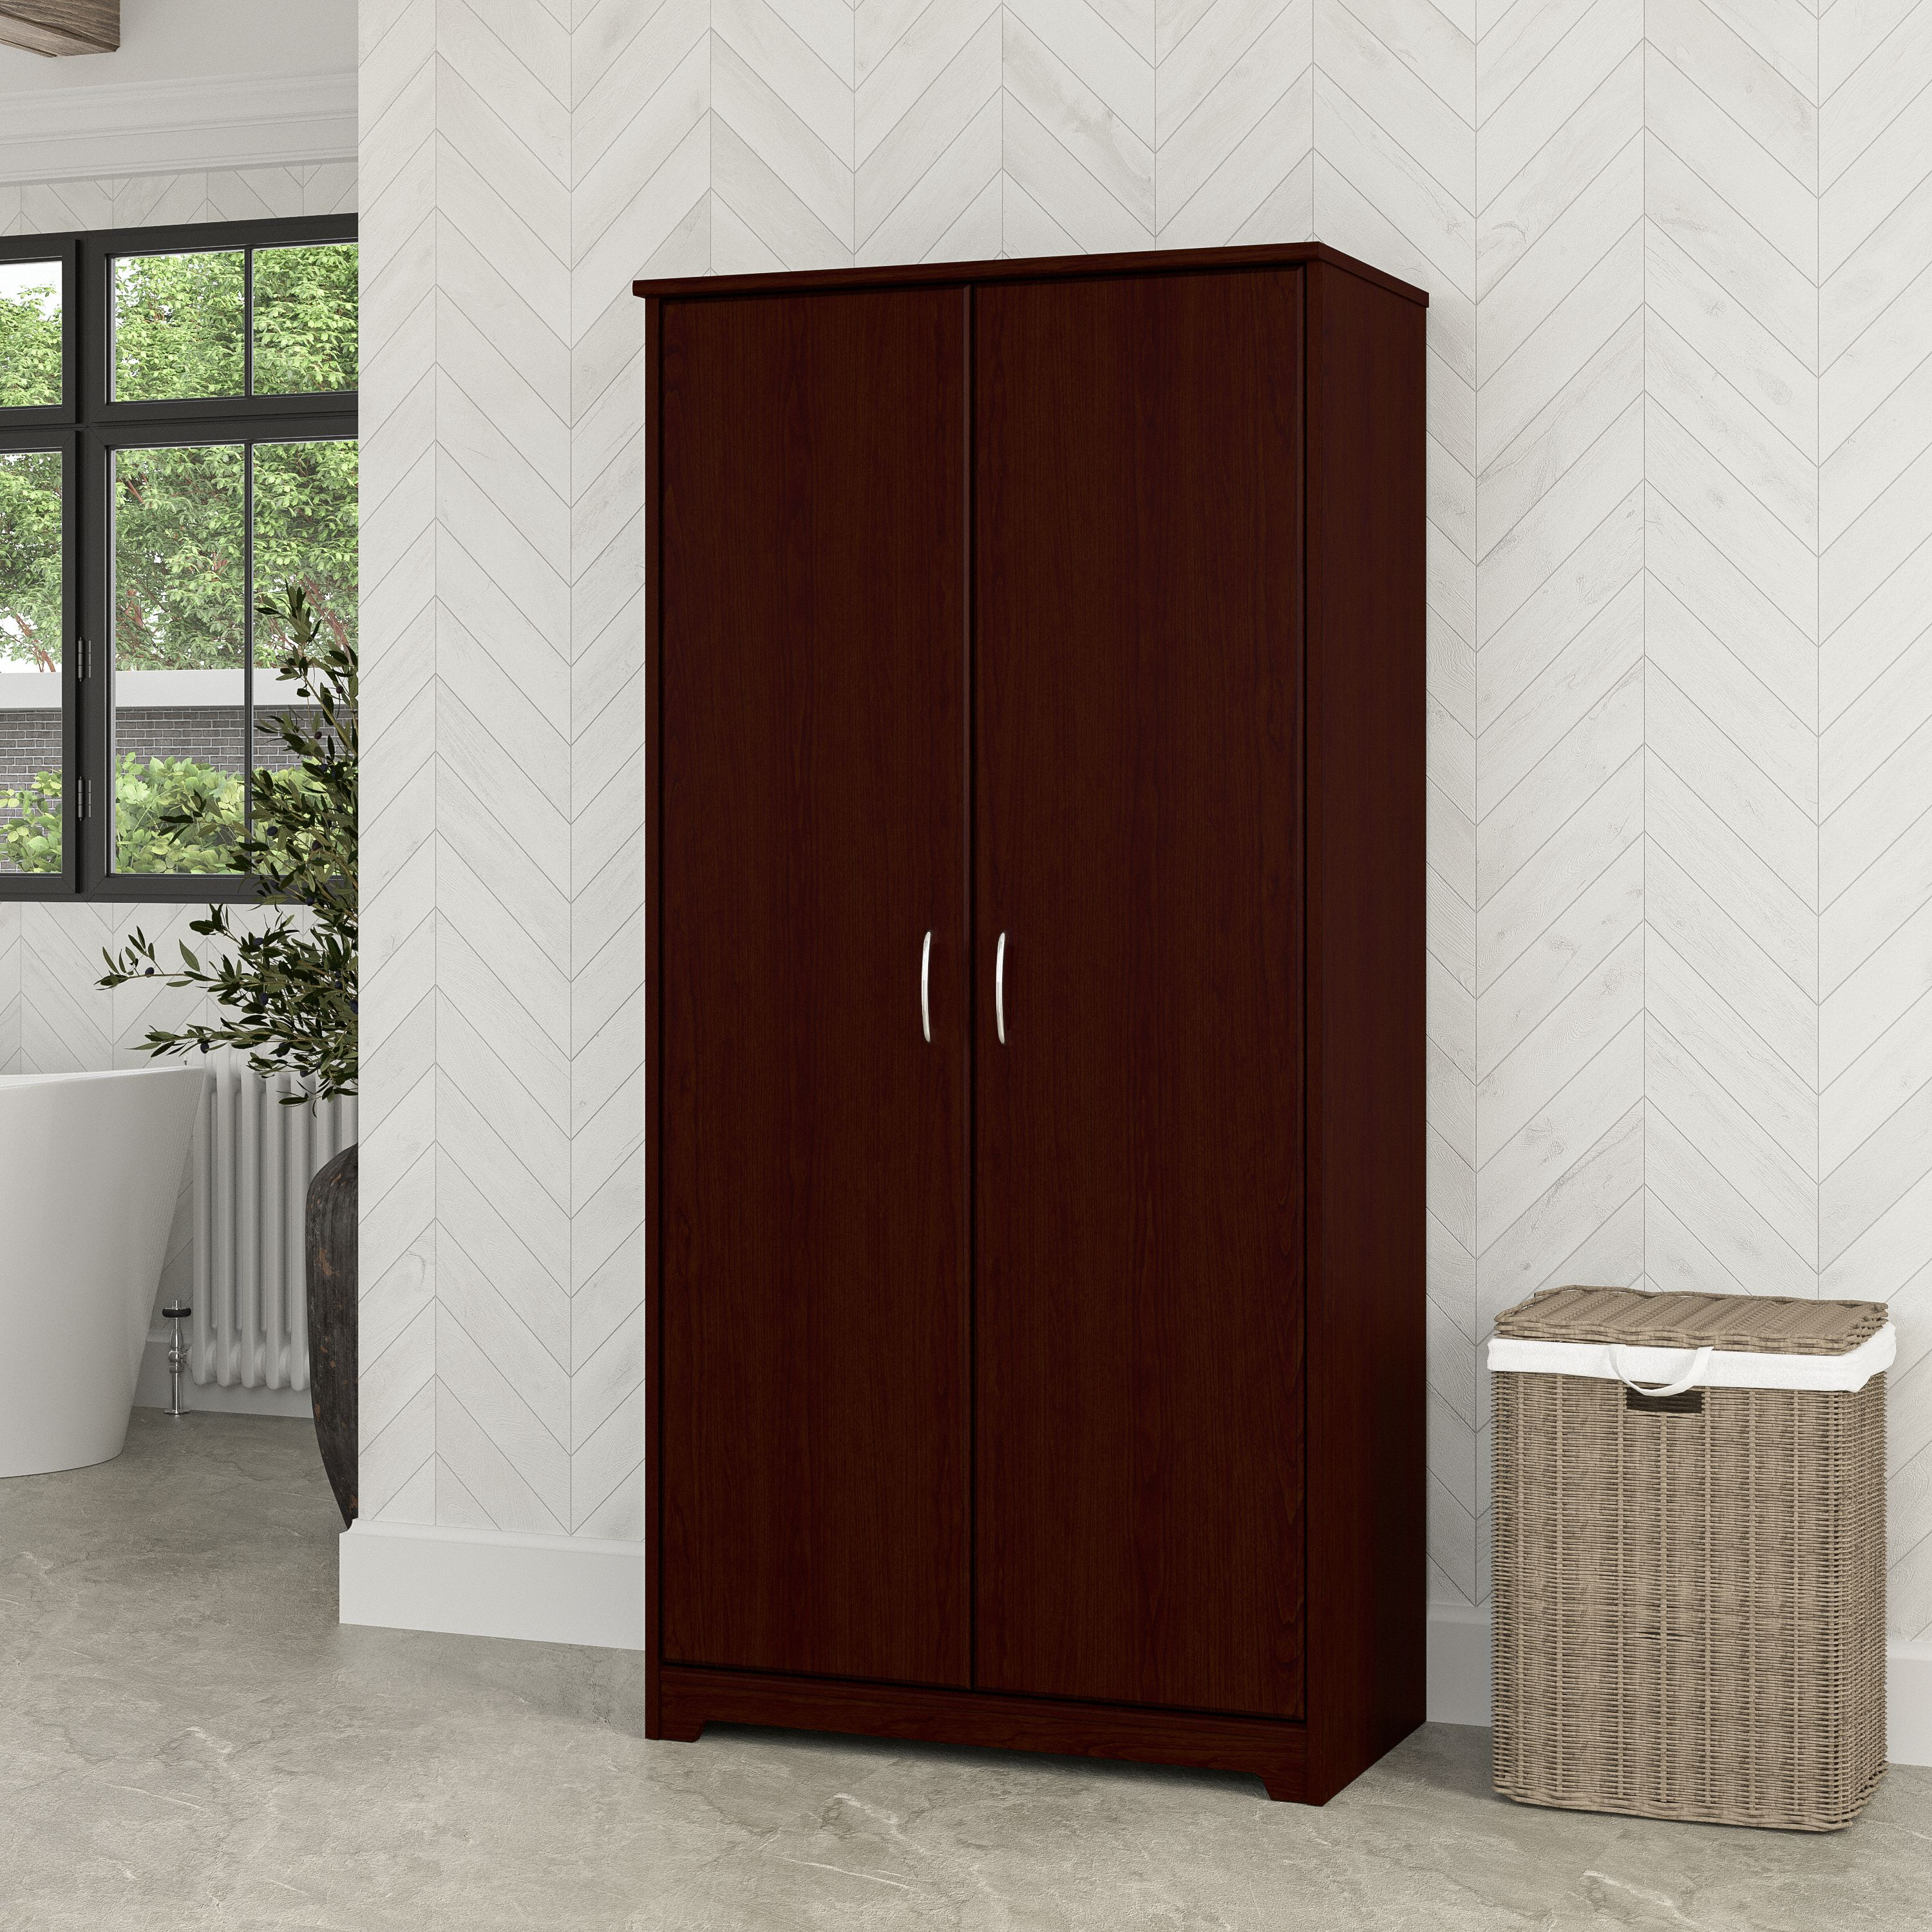 Shop Bush Furniture Cabot Tall Bathroom Storage Cabinet with Doors 01 WC31499-Z1 #color_harvest cherry